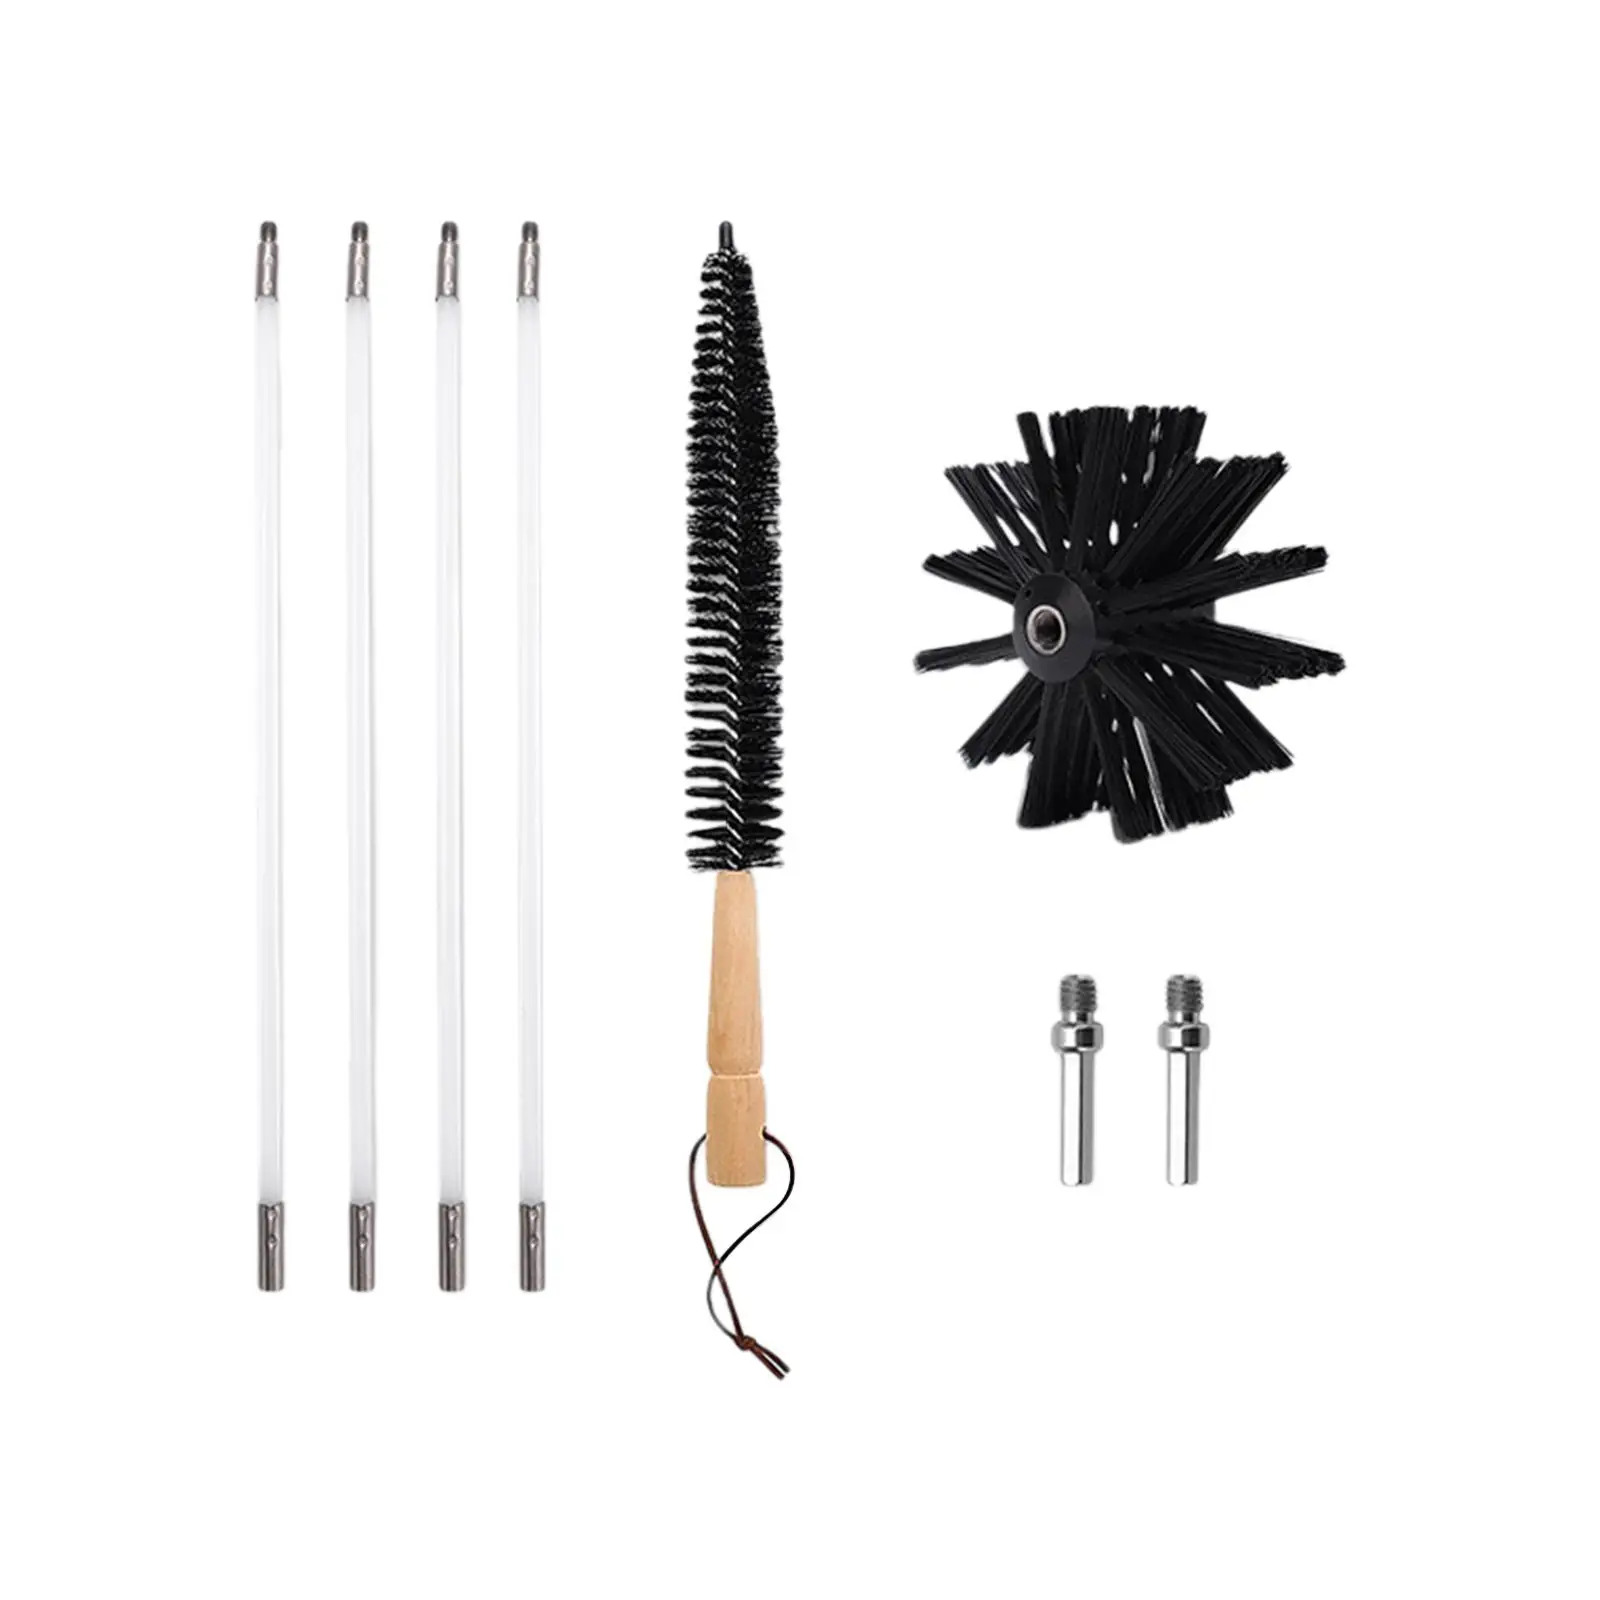 Dry Duct Cleaning Kit Long Handle Flexible Rod Professional with Brush Head and Dryer Lint Brush, Bendable Rods Accessories